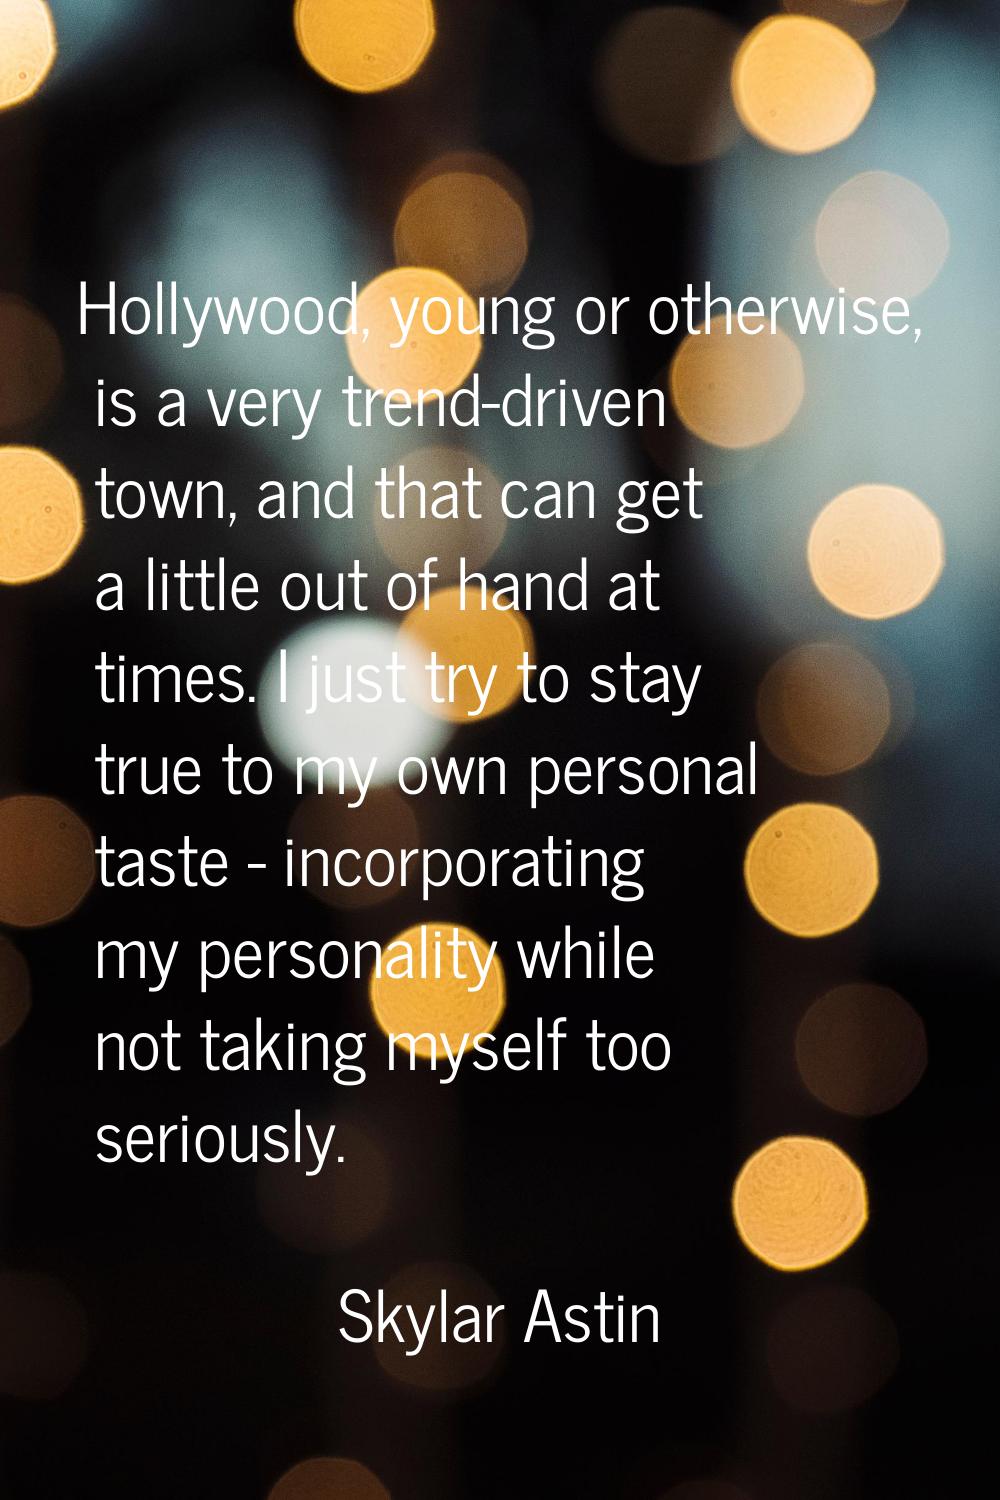 Hollywood, young or otherwise, is a very trend-driven town, and that can get a little out of hand a